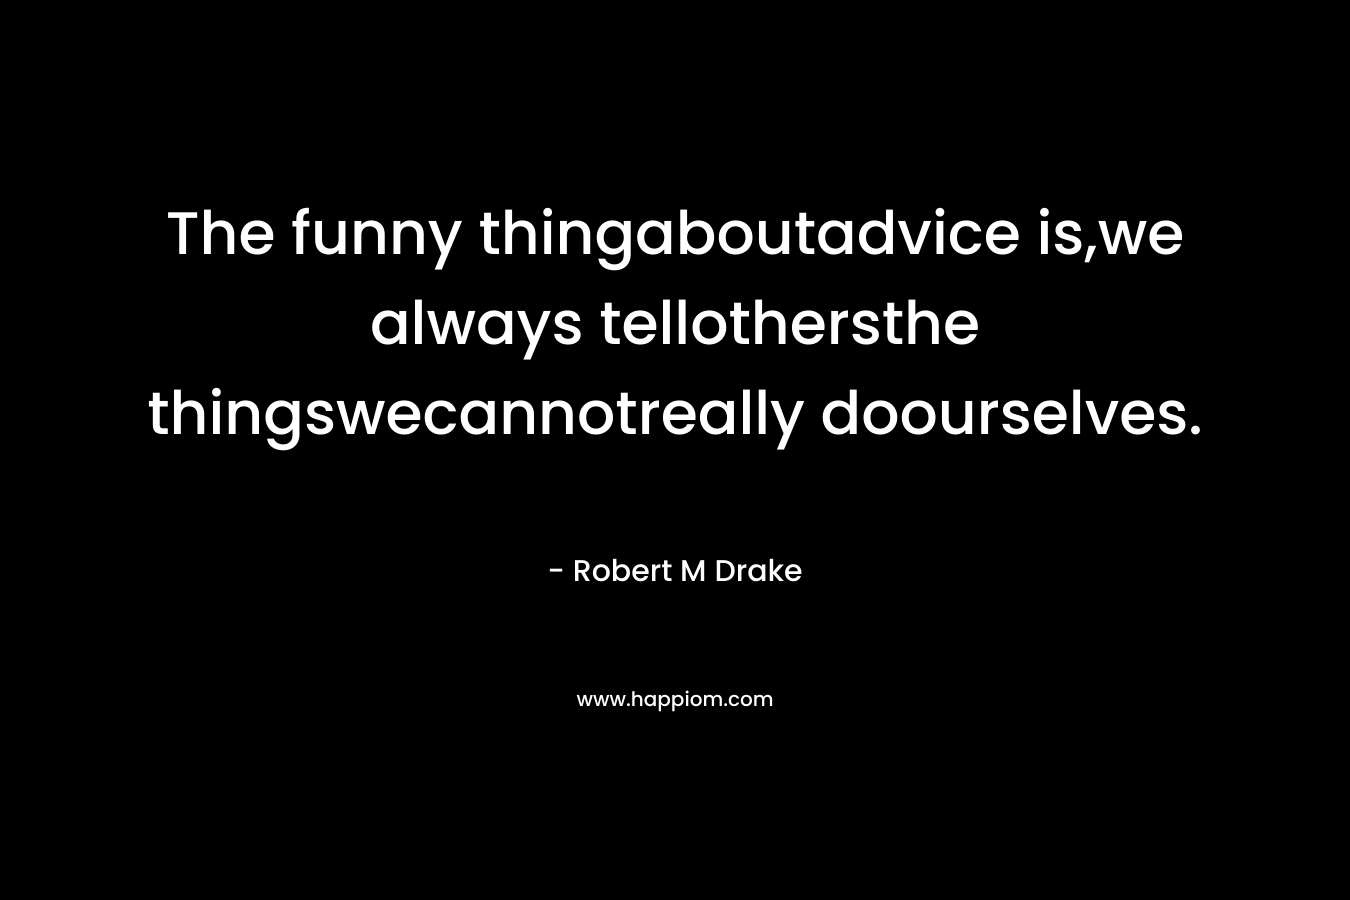 The funny thingaboutadvice is,we always tellothersthe thingswecannotreally doourselves. – Robert M Drake